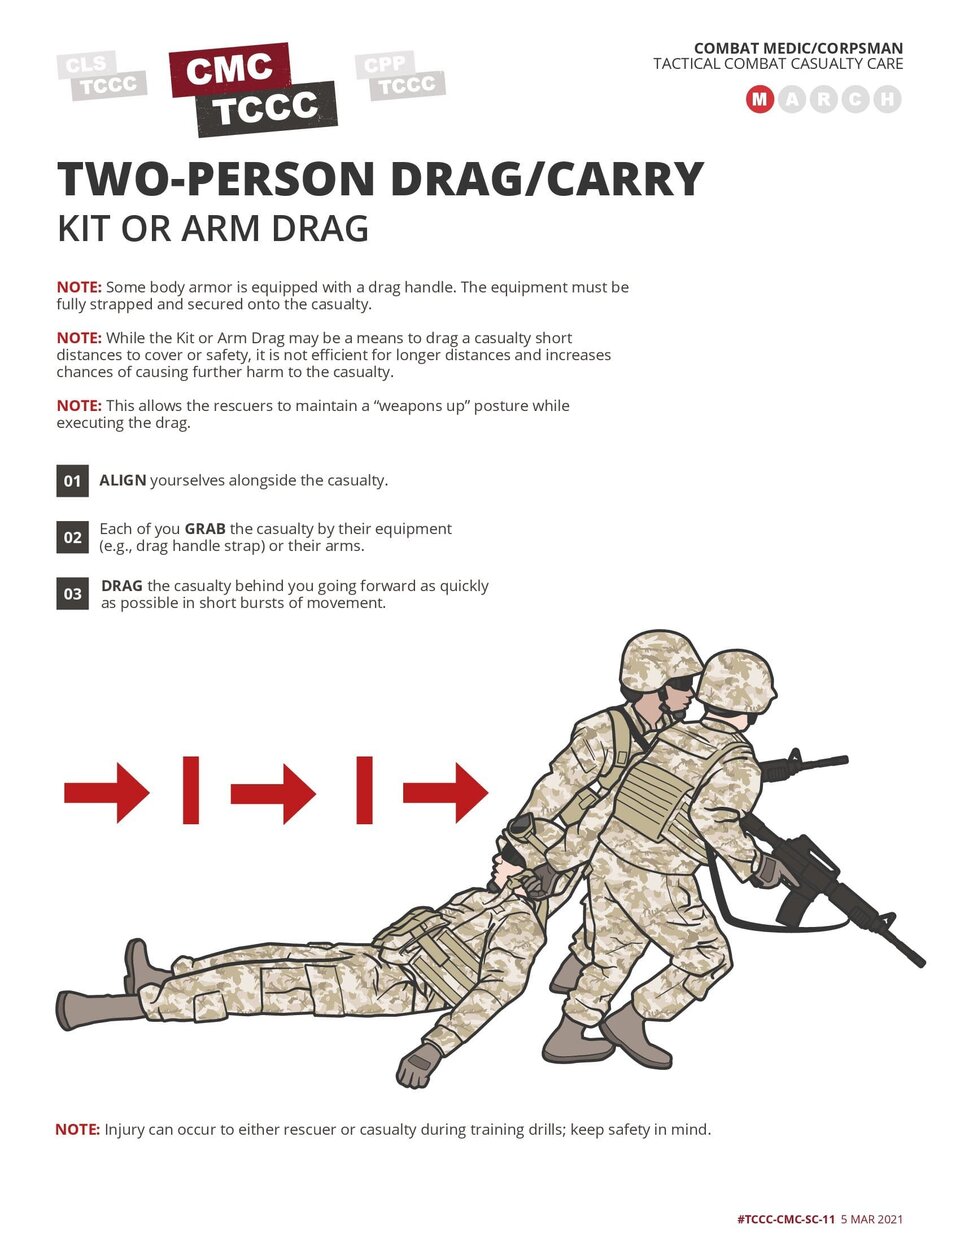 Two-Person Drag/Carry Skills Card